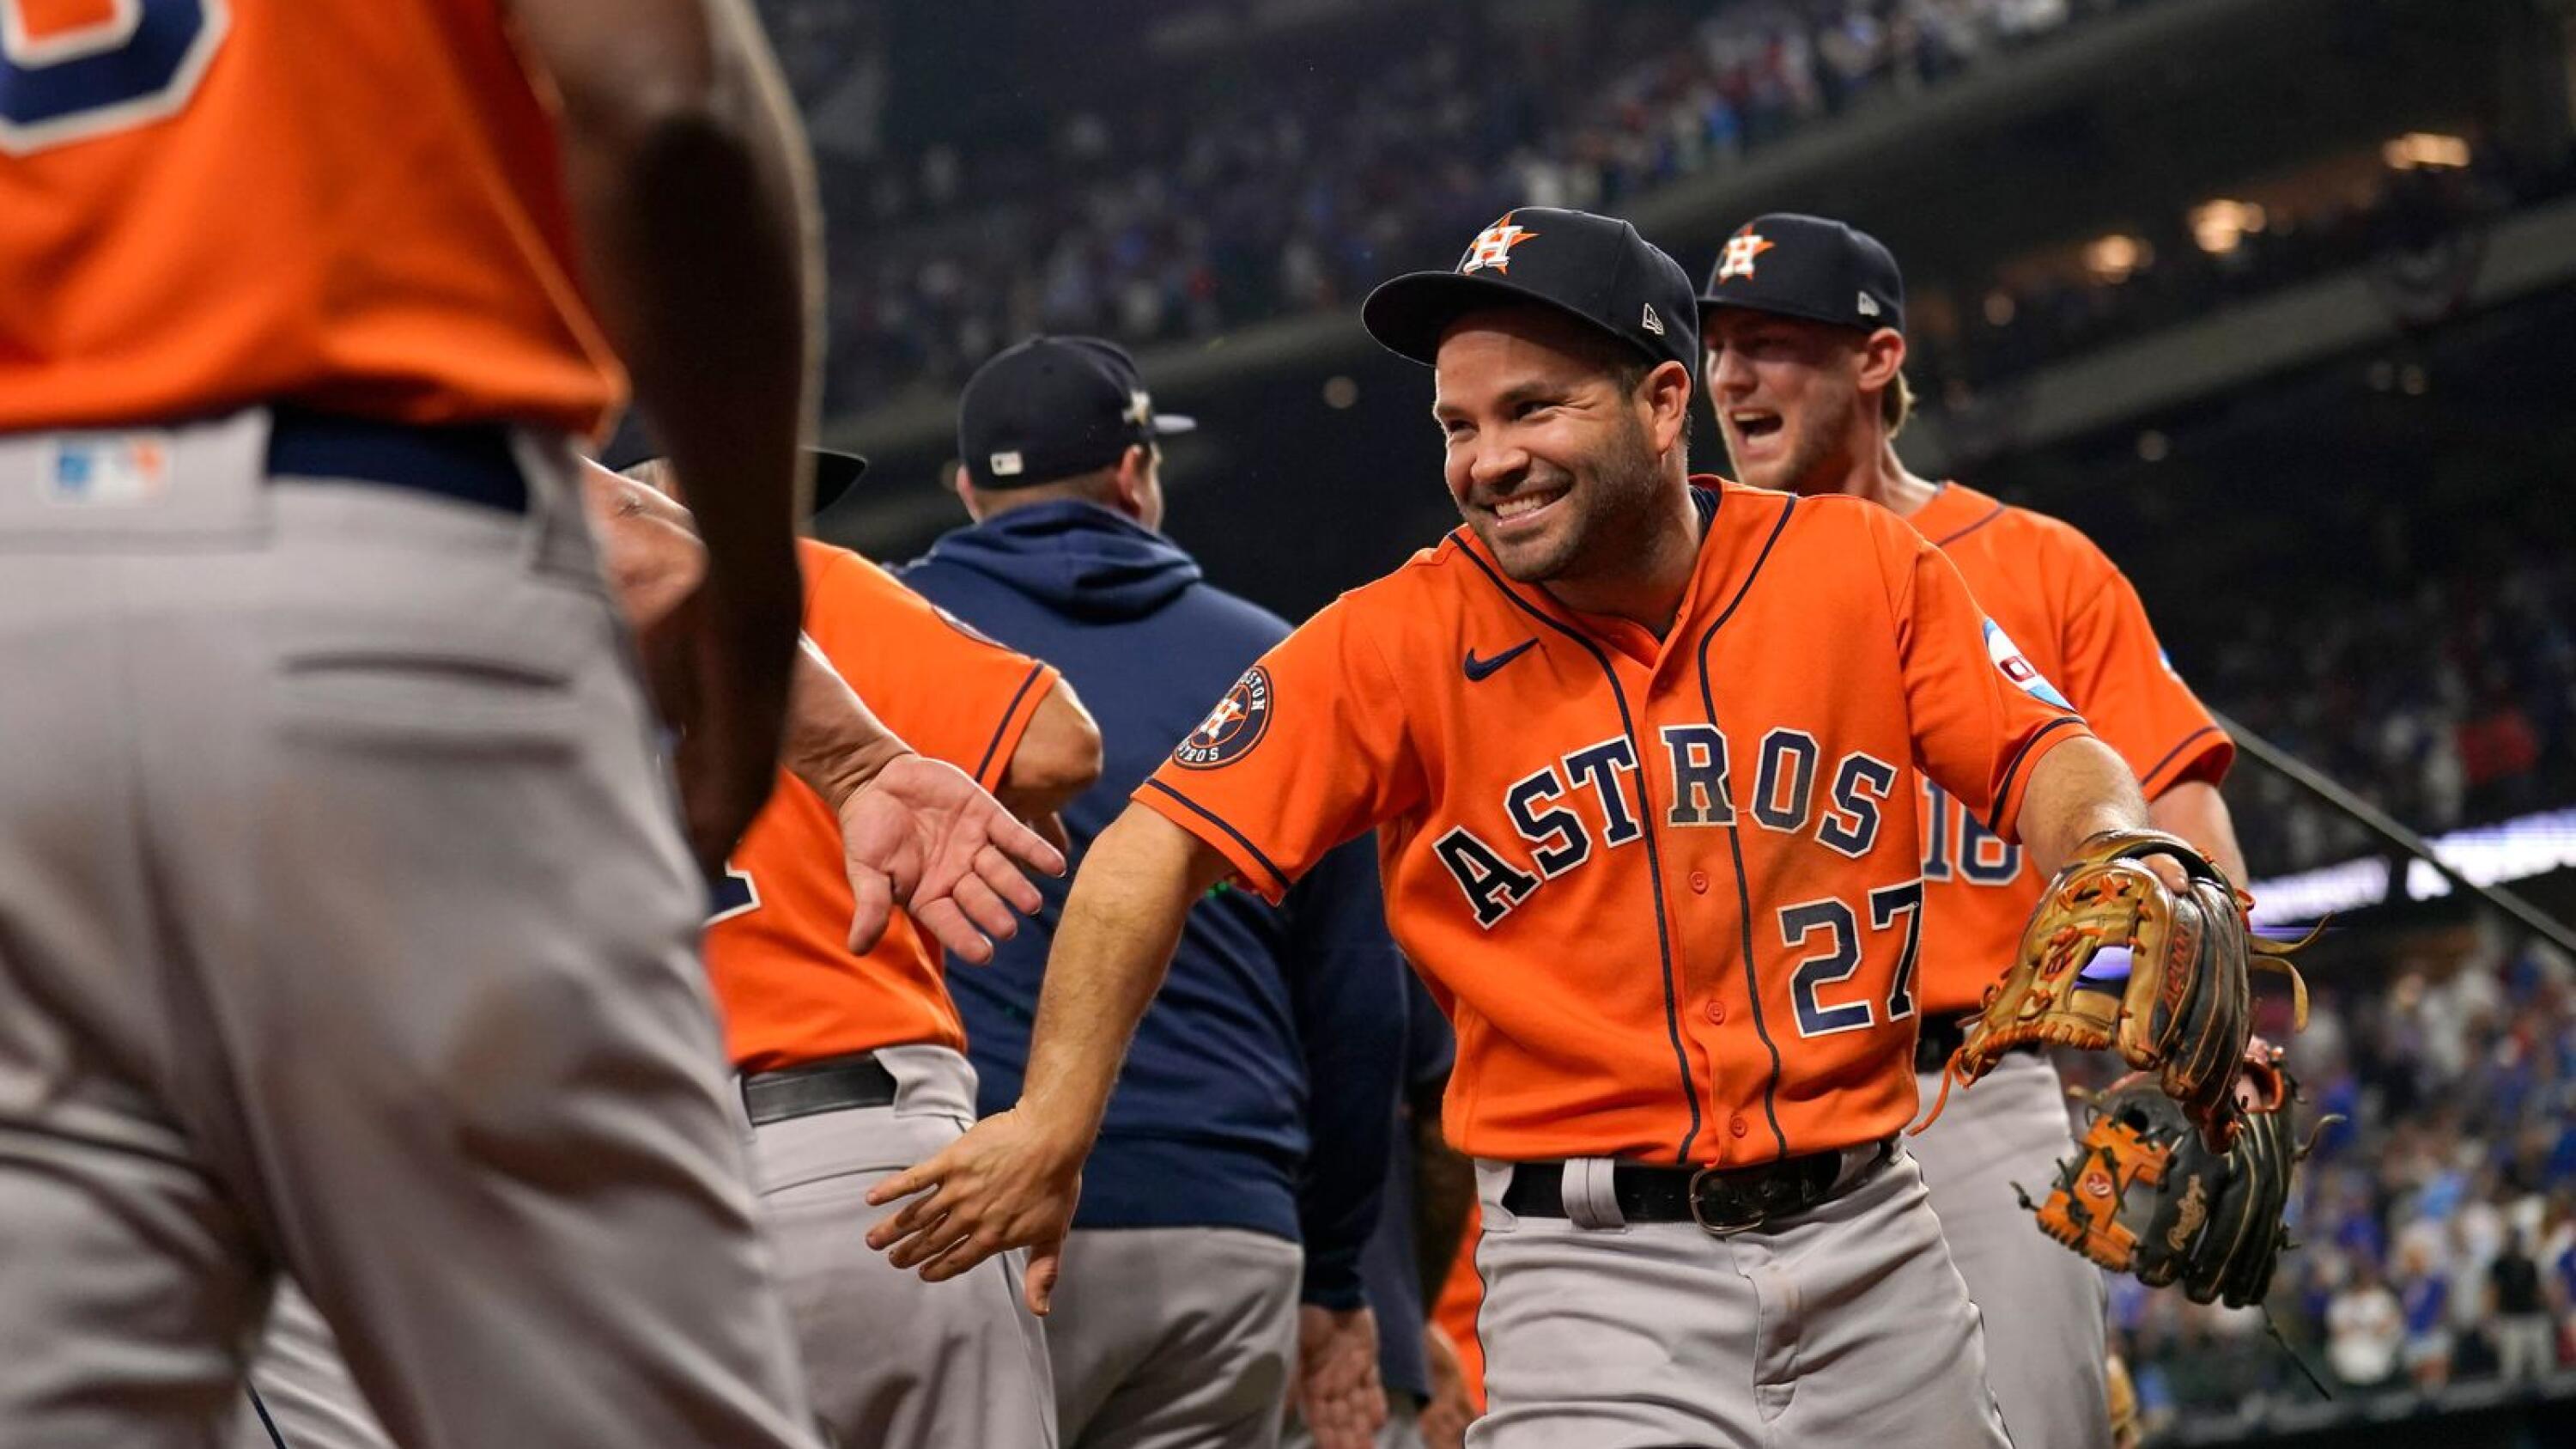 Altuve 4th in MLB history with 3 HRs in first 3 innings as Astros destroy  Rangers